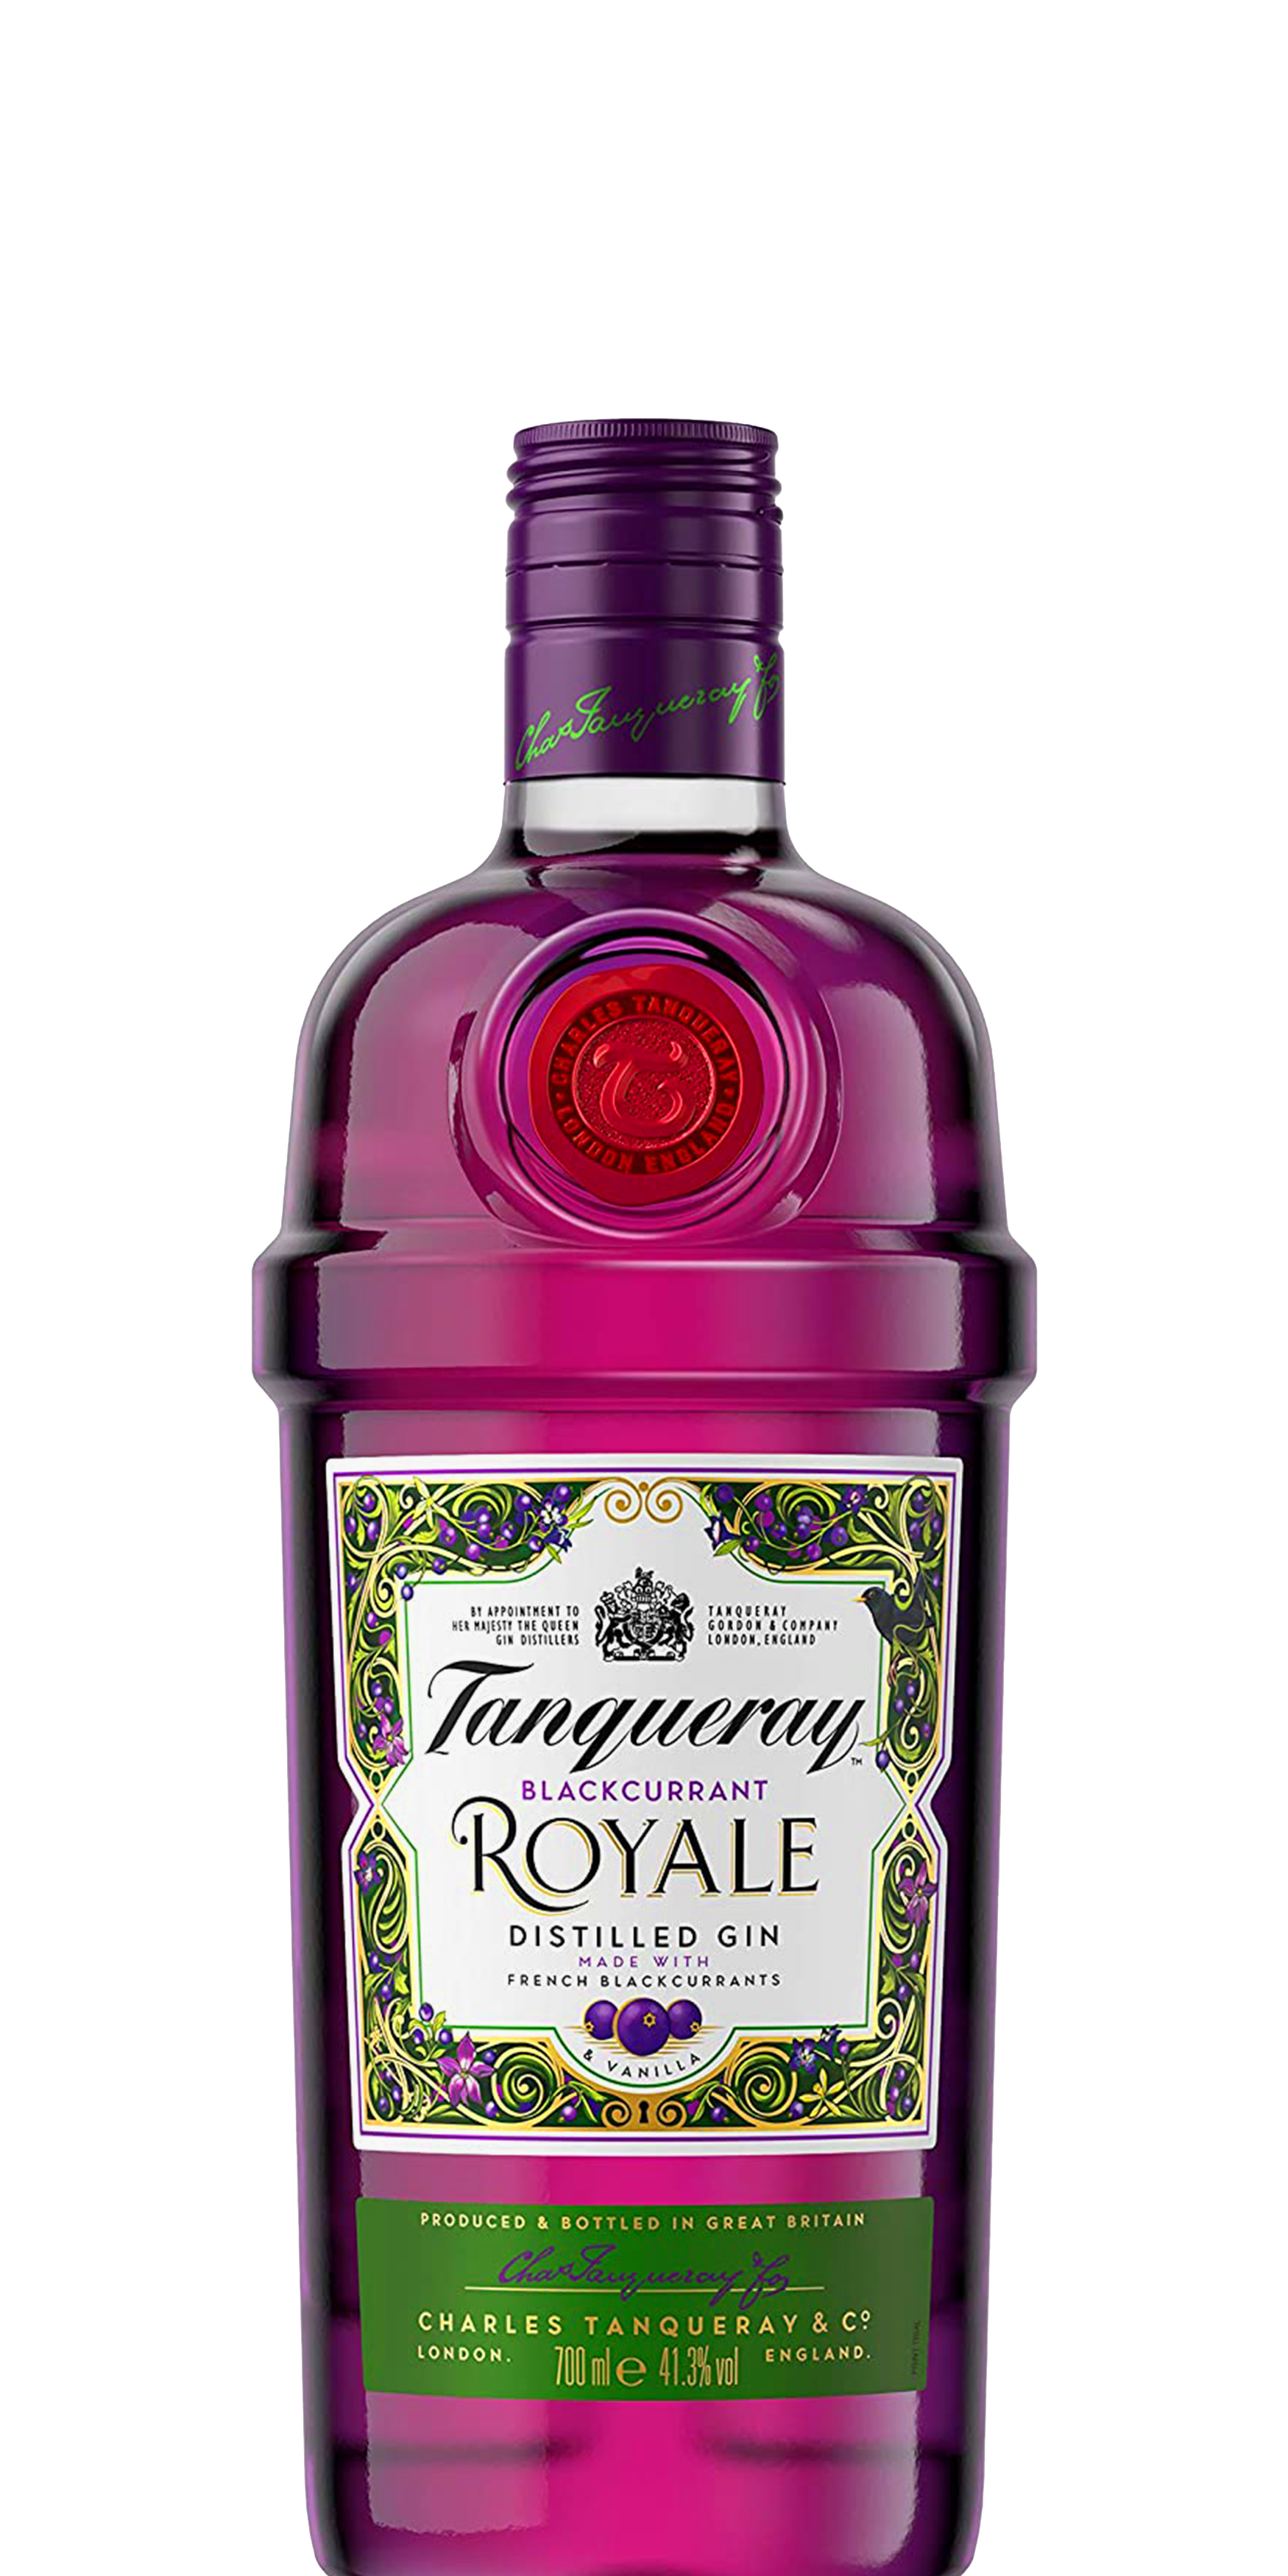 tanqueray-blackcurrantroyale-700ml.png